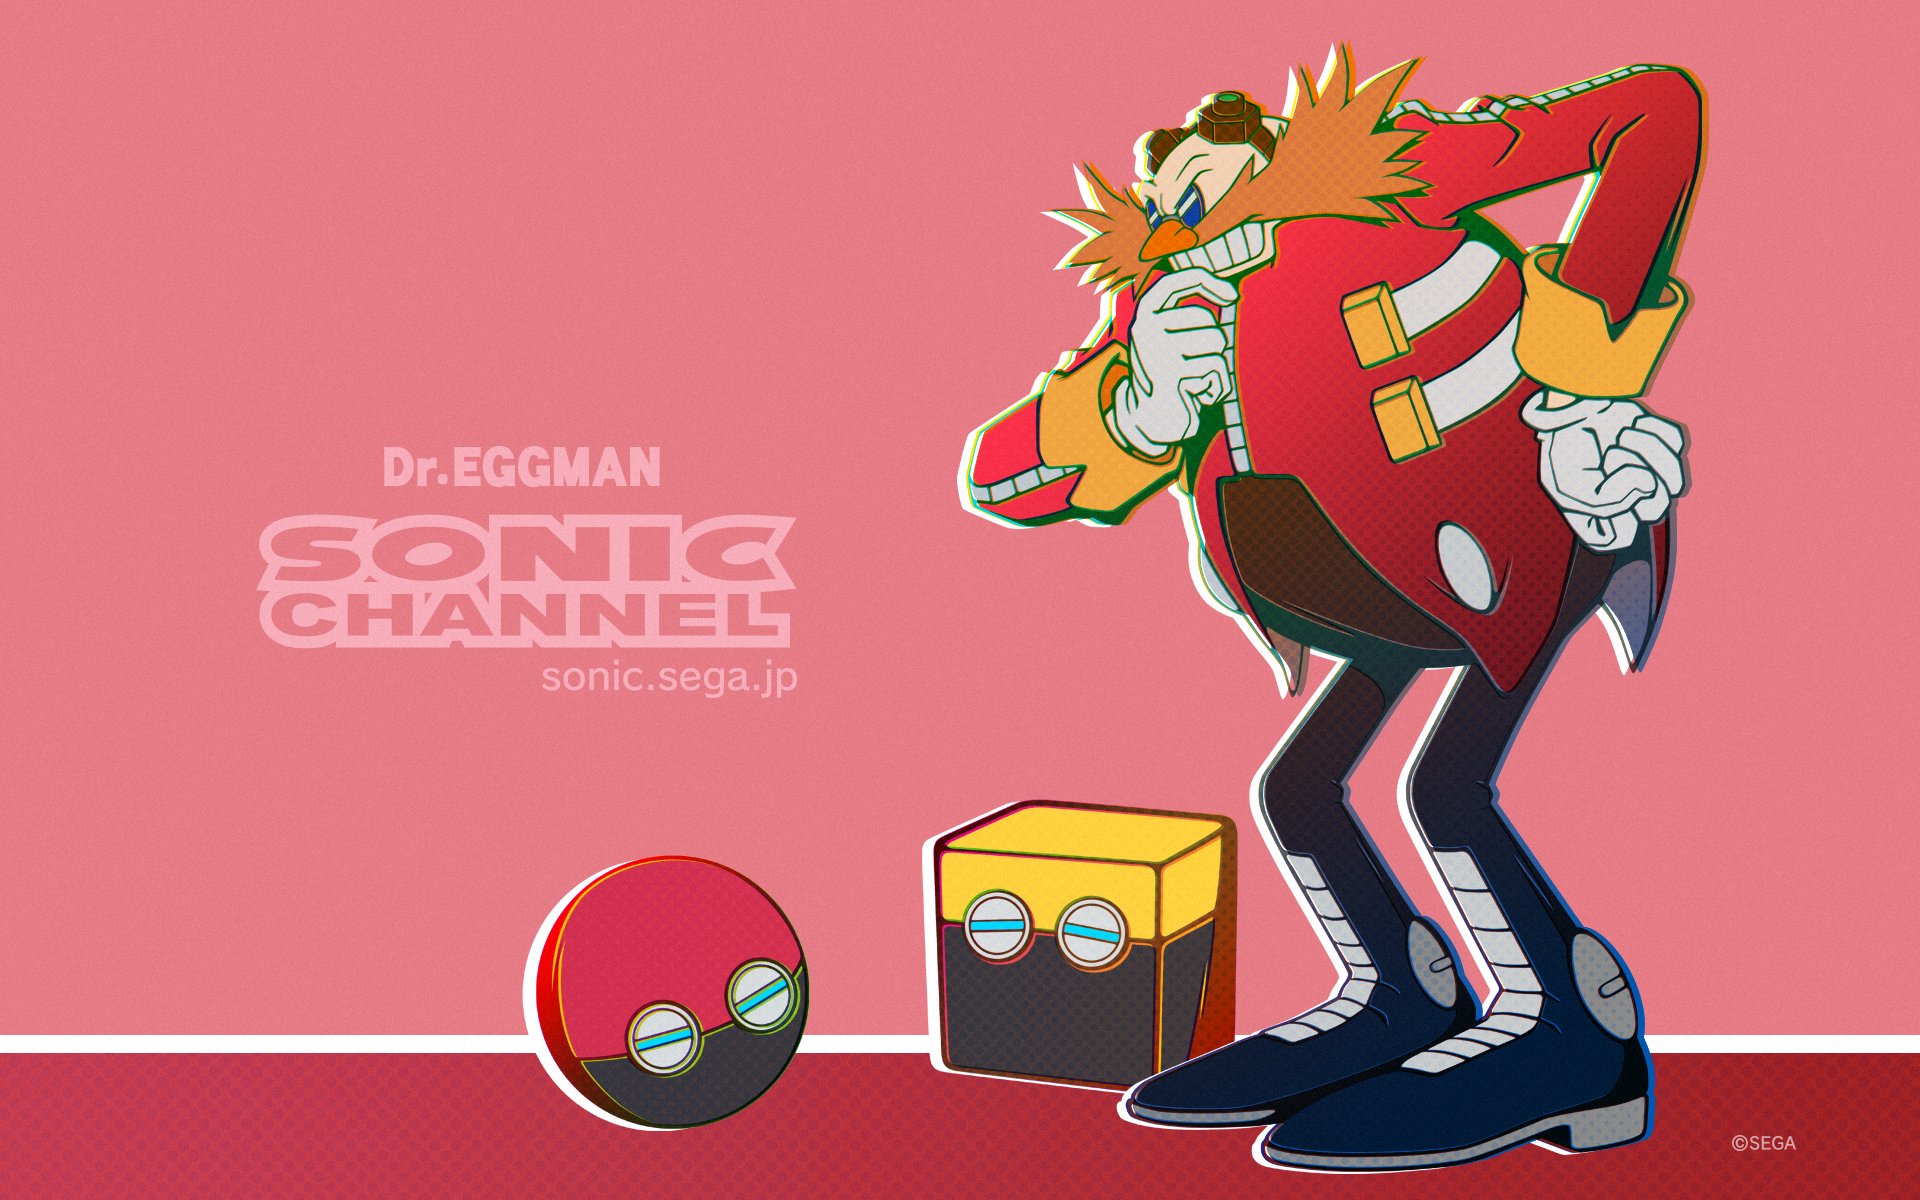 video game, sonic the hedgehog, cubot (sonic the hedgehog), doctor eggman, orbot (sonic the hedgehog), sonic channel, sonic